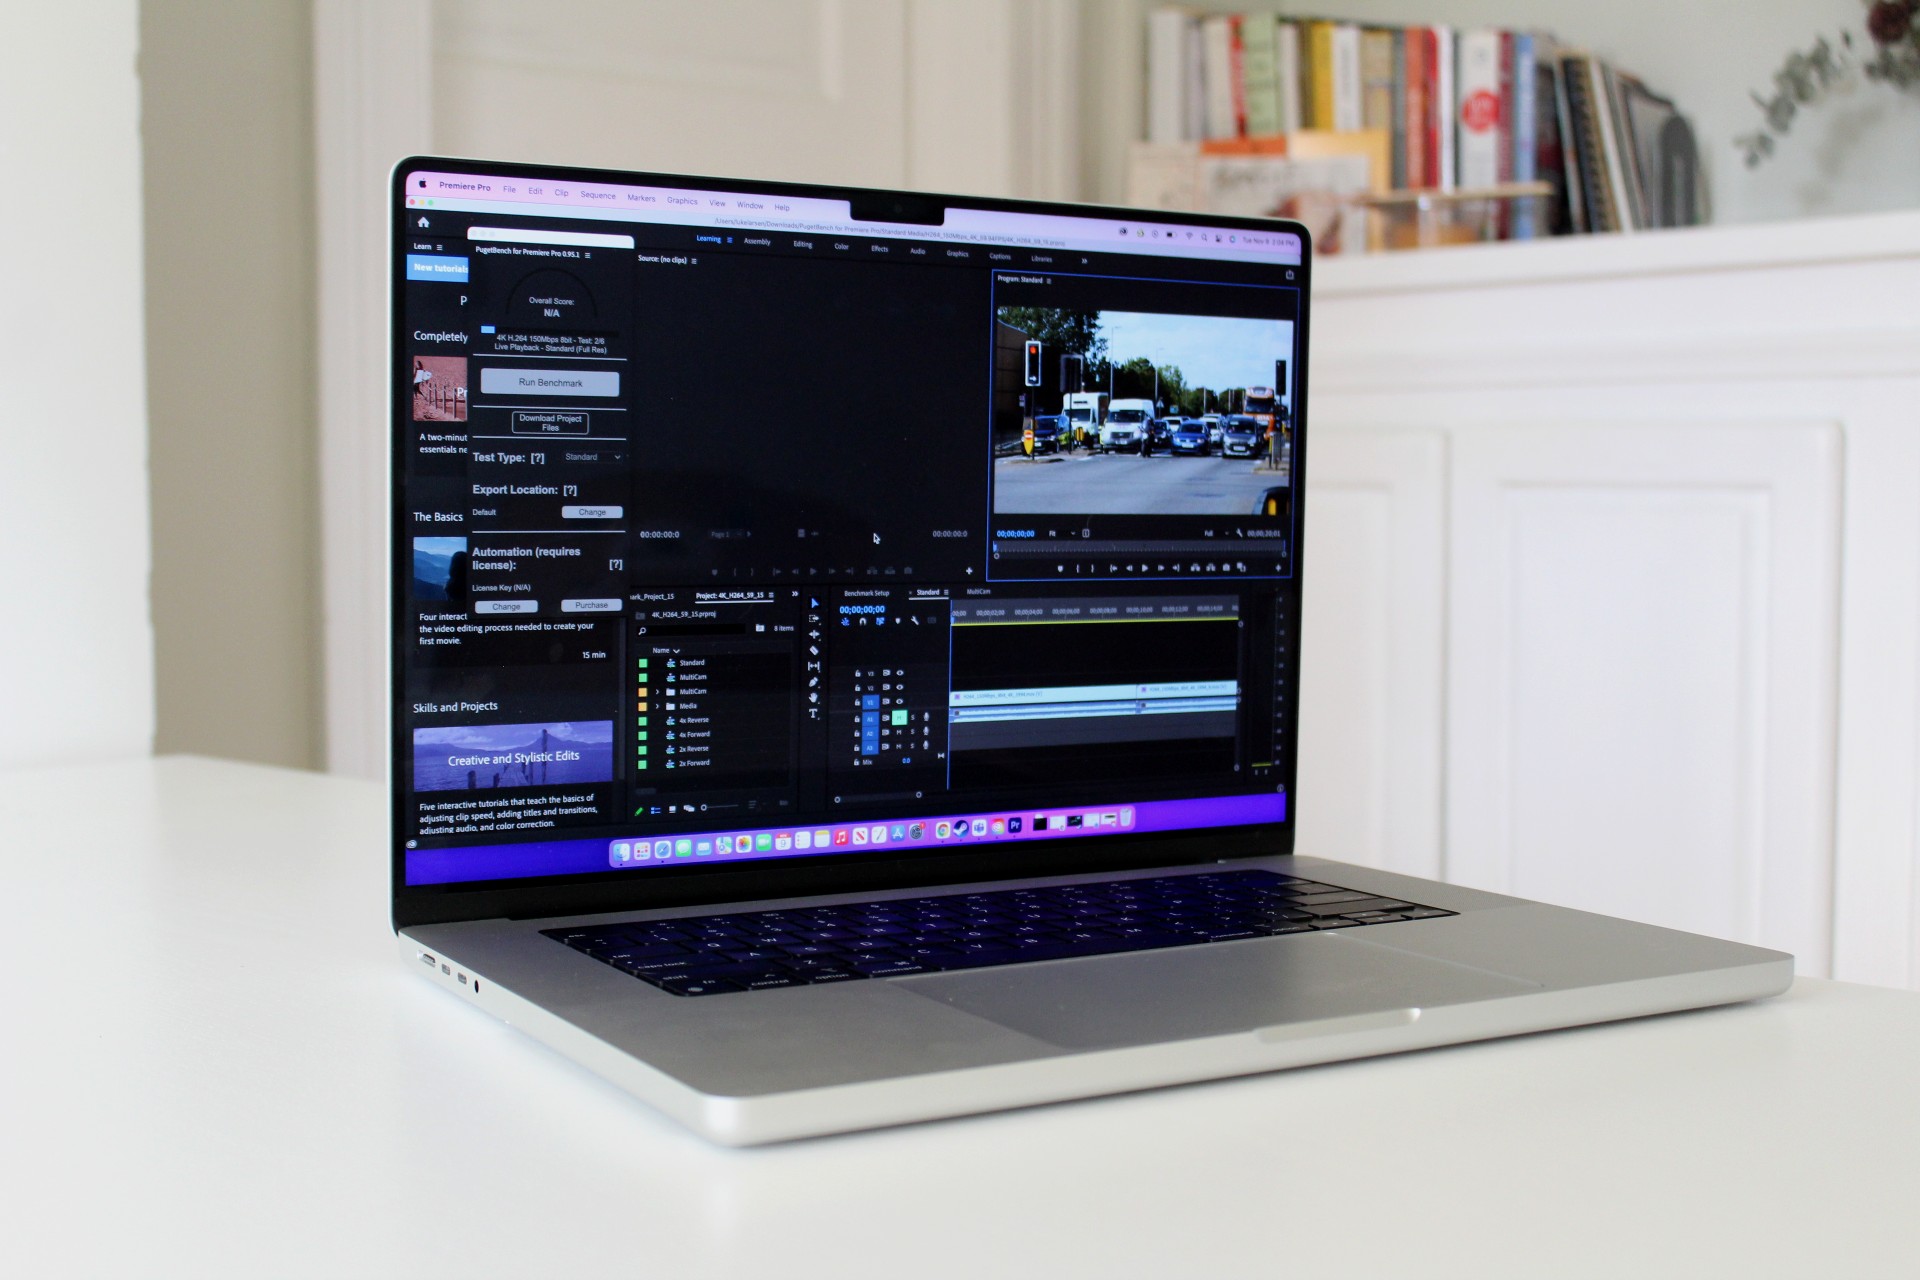 Review: Apple's M1 MacBook Air and M1 MacBook Pro [Video] - 9to5Mac